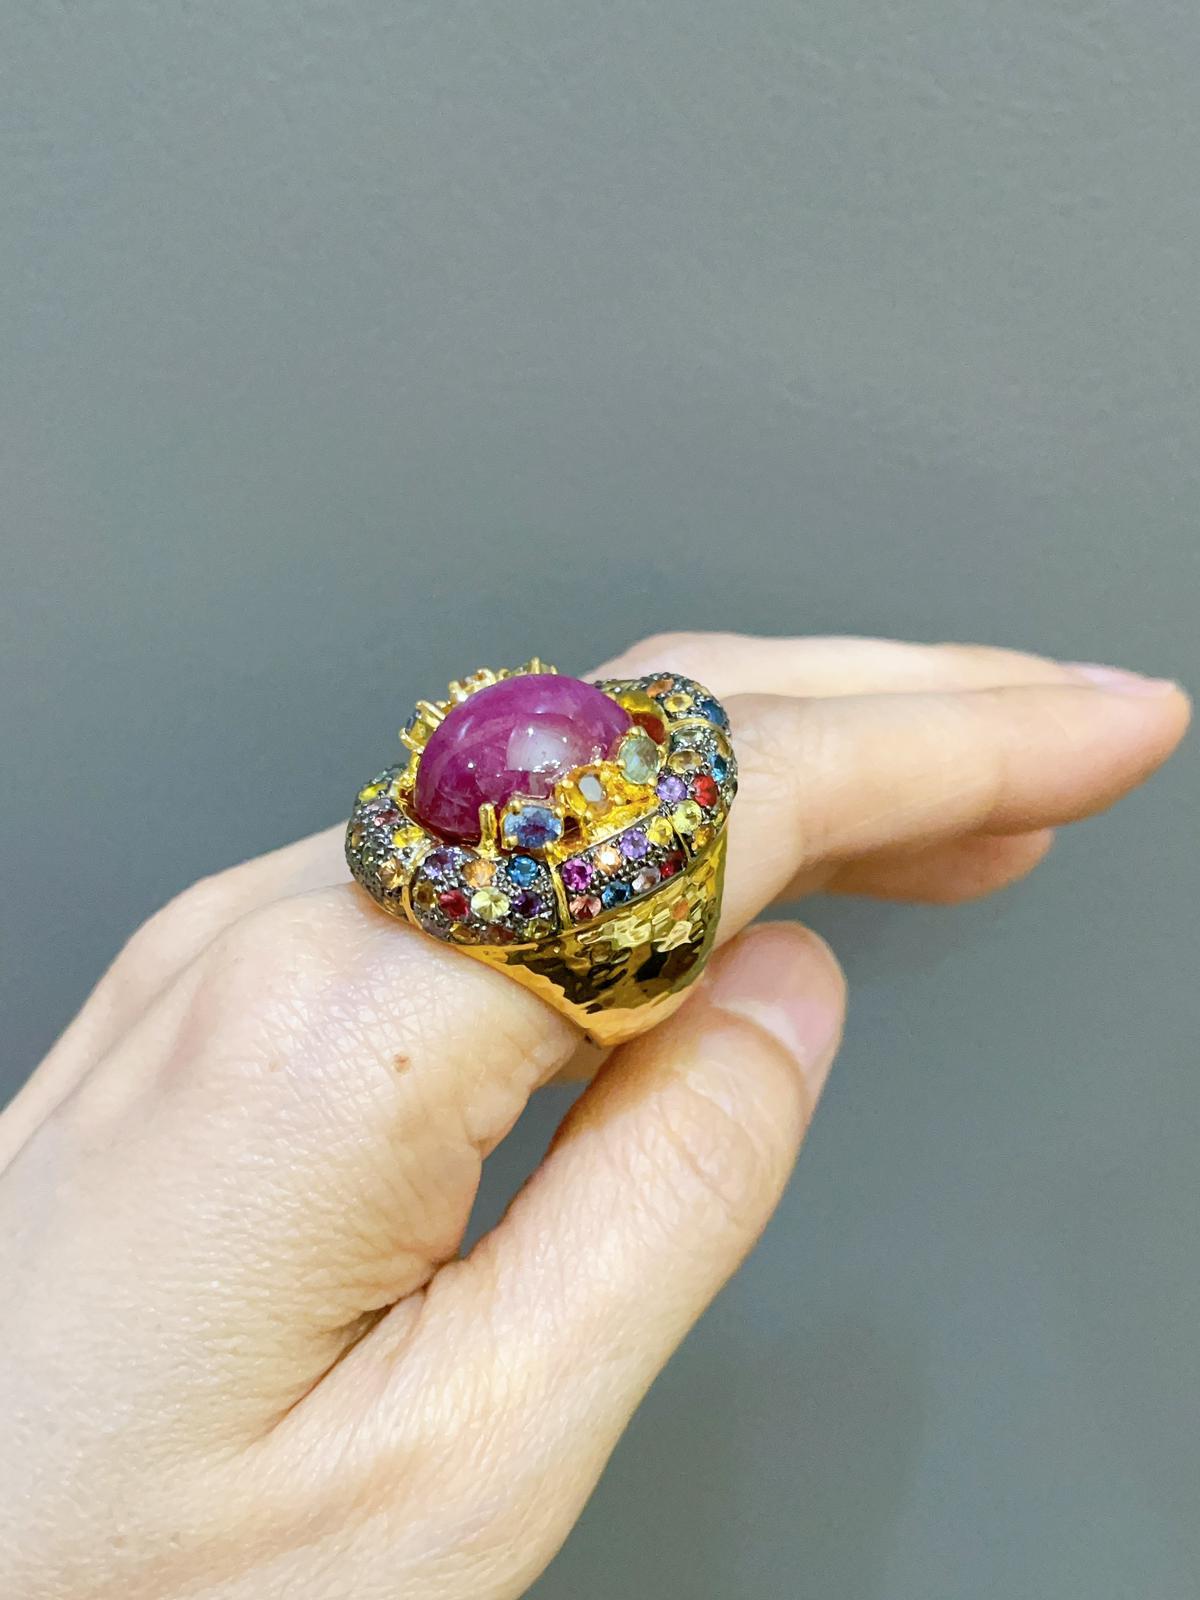 Cabochon Bochic “Capri” Star Ruby & Sapphire Cocktail Ring Set in 22K Gold & Silver For Sale